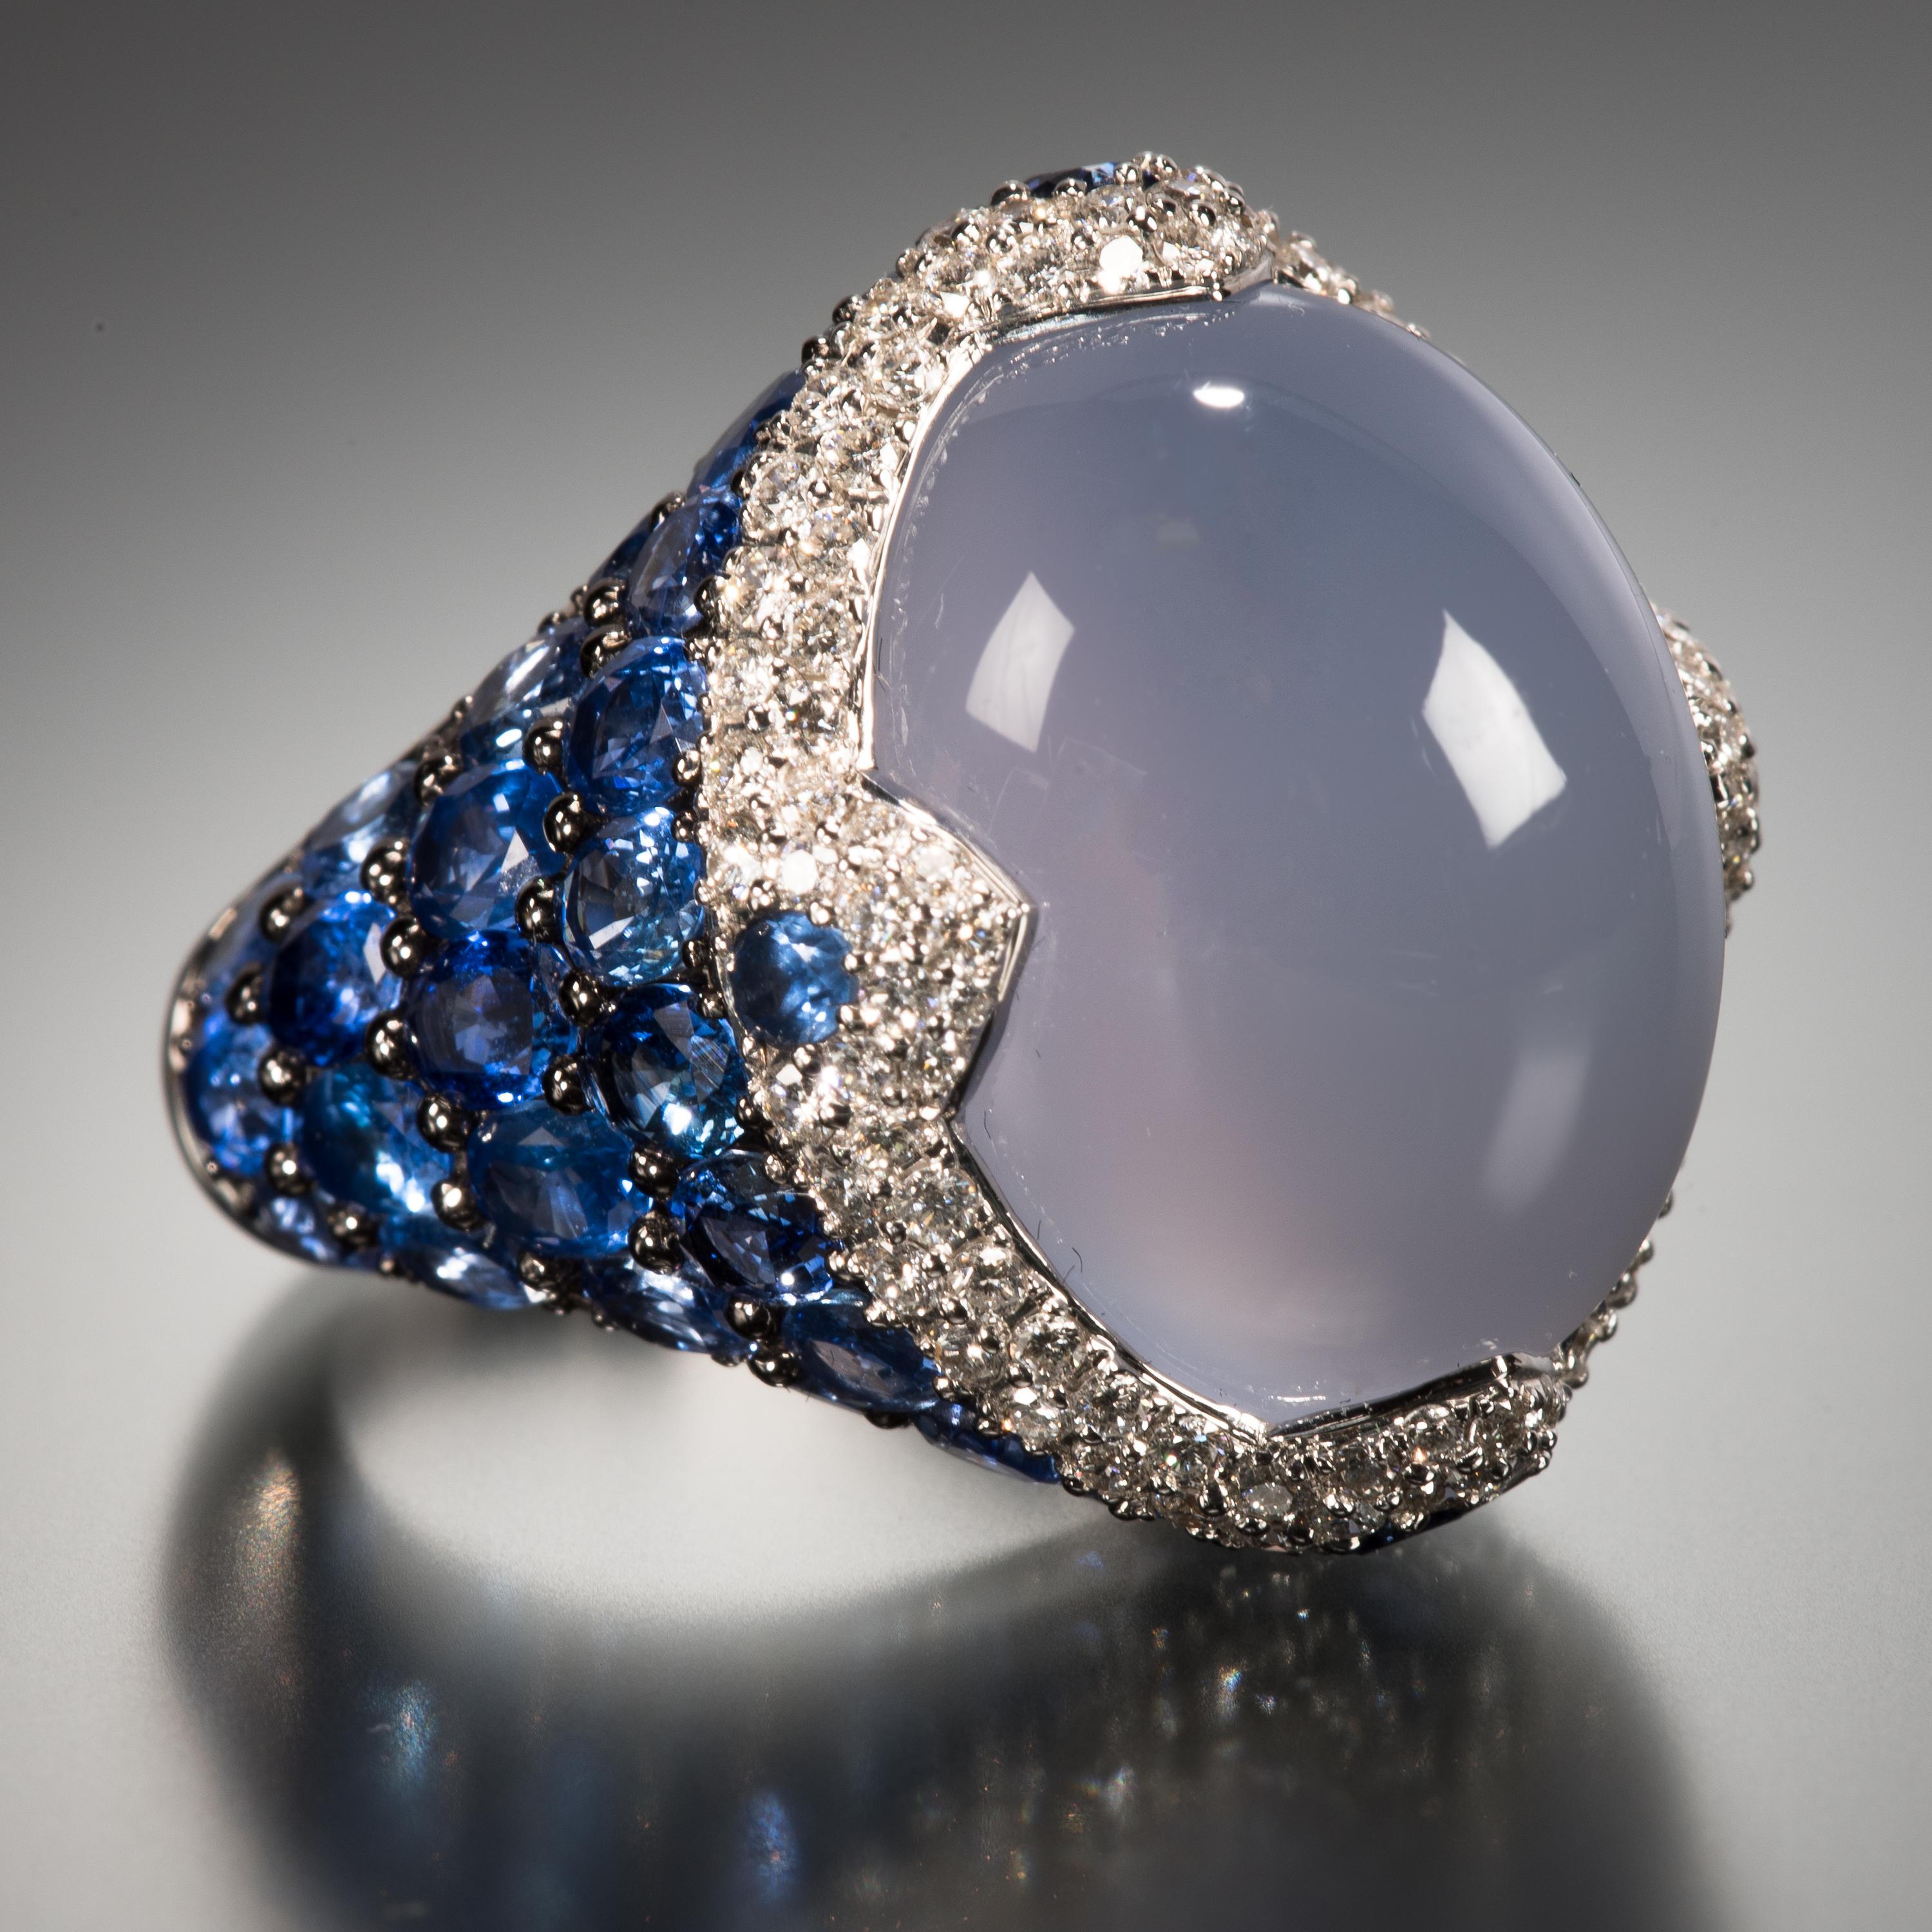 Asprey demonstrates how stones can work together to create a piece that is truly exceptional. The center stone of this ring is a luscious 22.47 carat blue cabochon chalcedony surrounded by a collar of vibrant diamonds and enhanced by an exposed